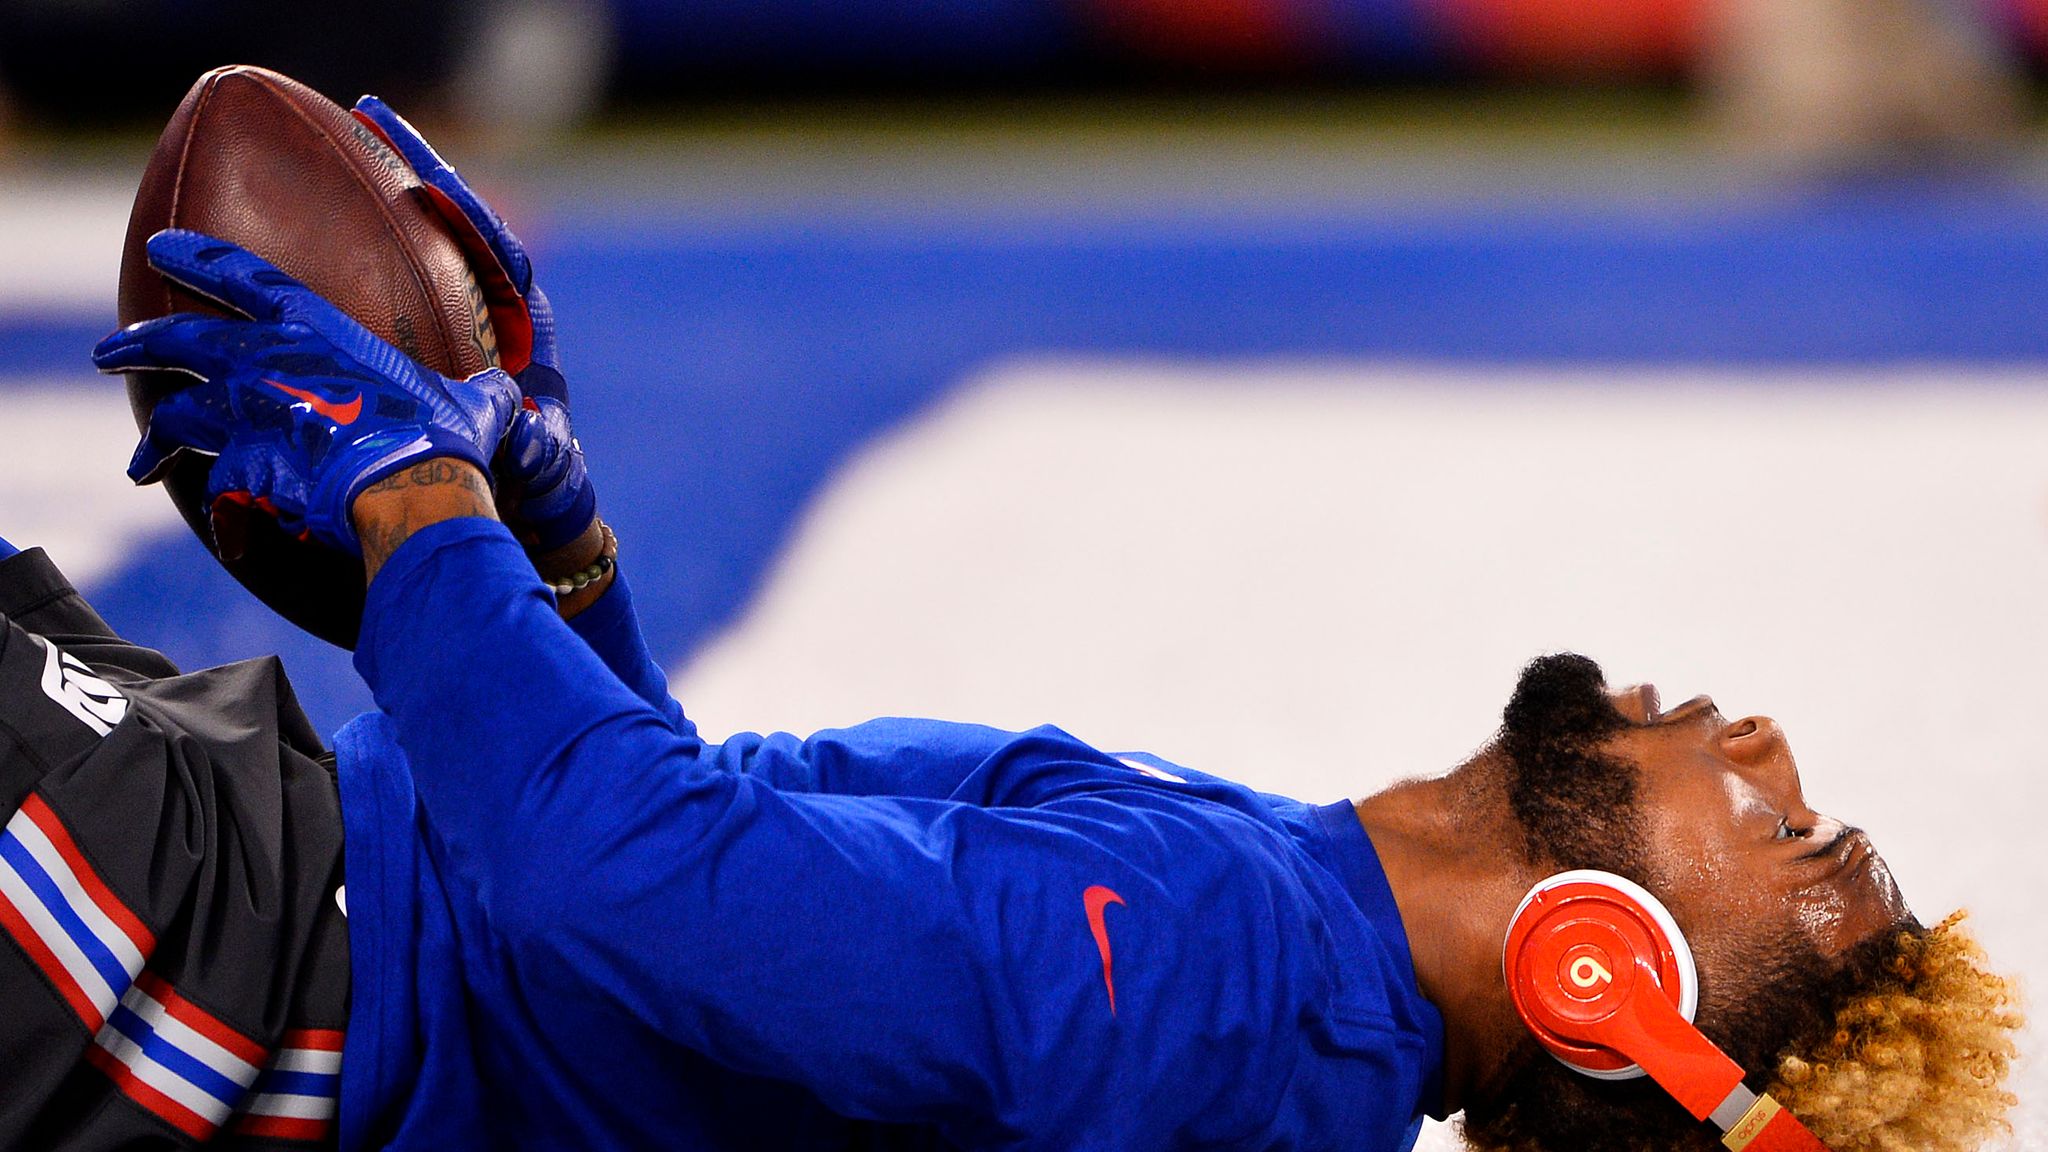 Odell Beckham Jr.'s amazing catch can't spark NY Giants to win as